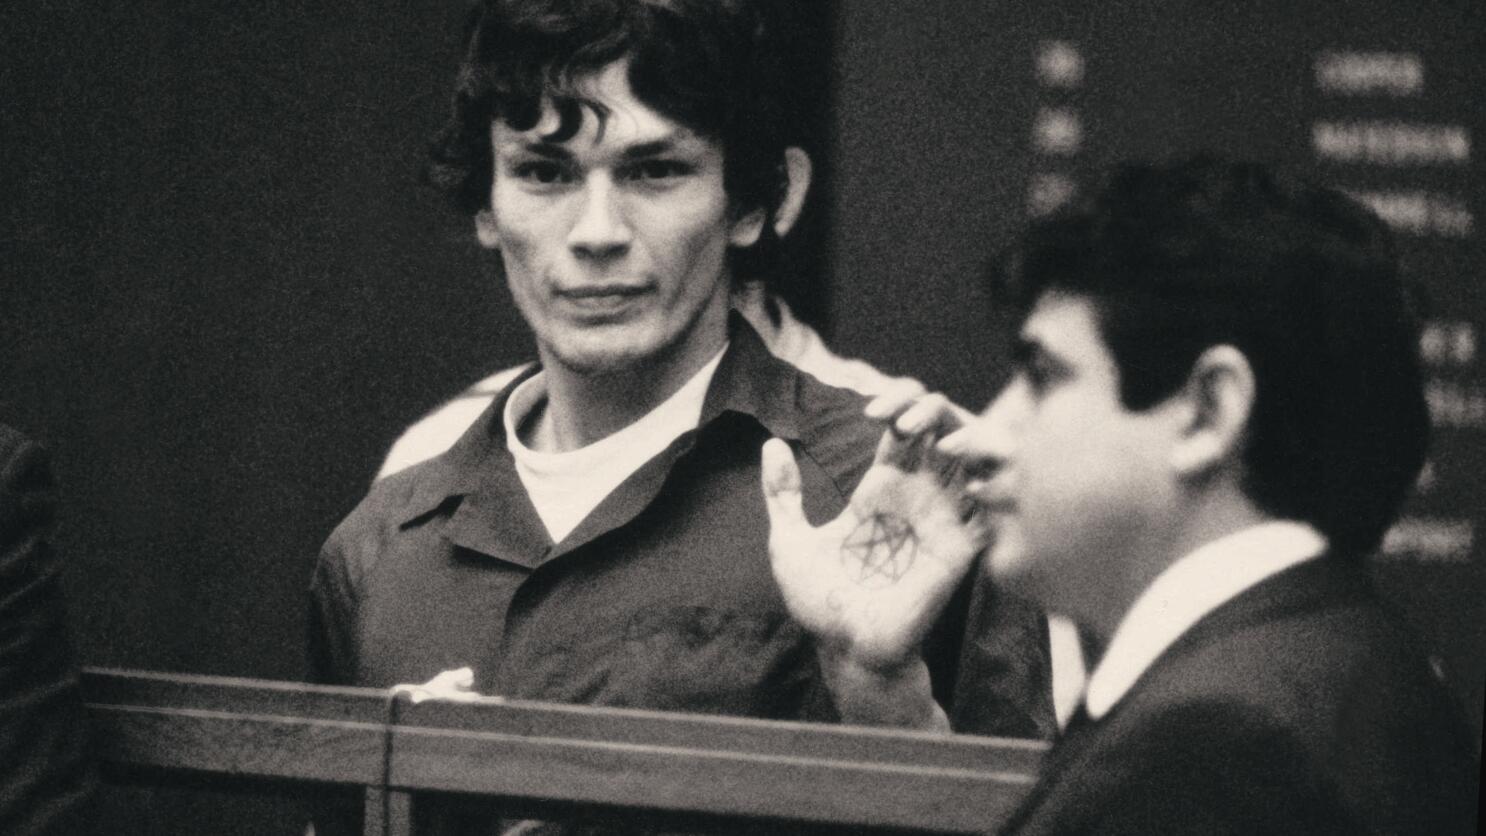 Serial killers: the most dire stories to watch on Netflix - Infobae